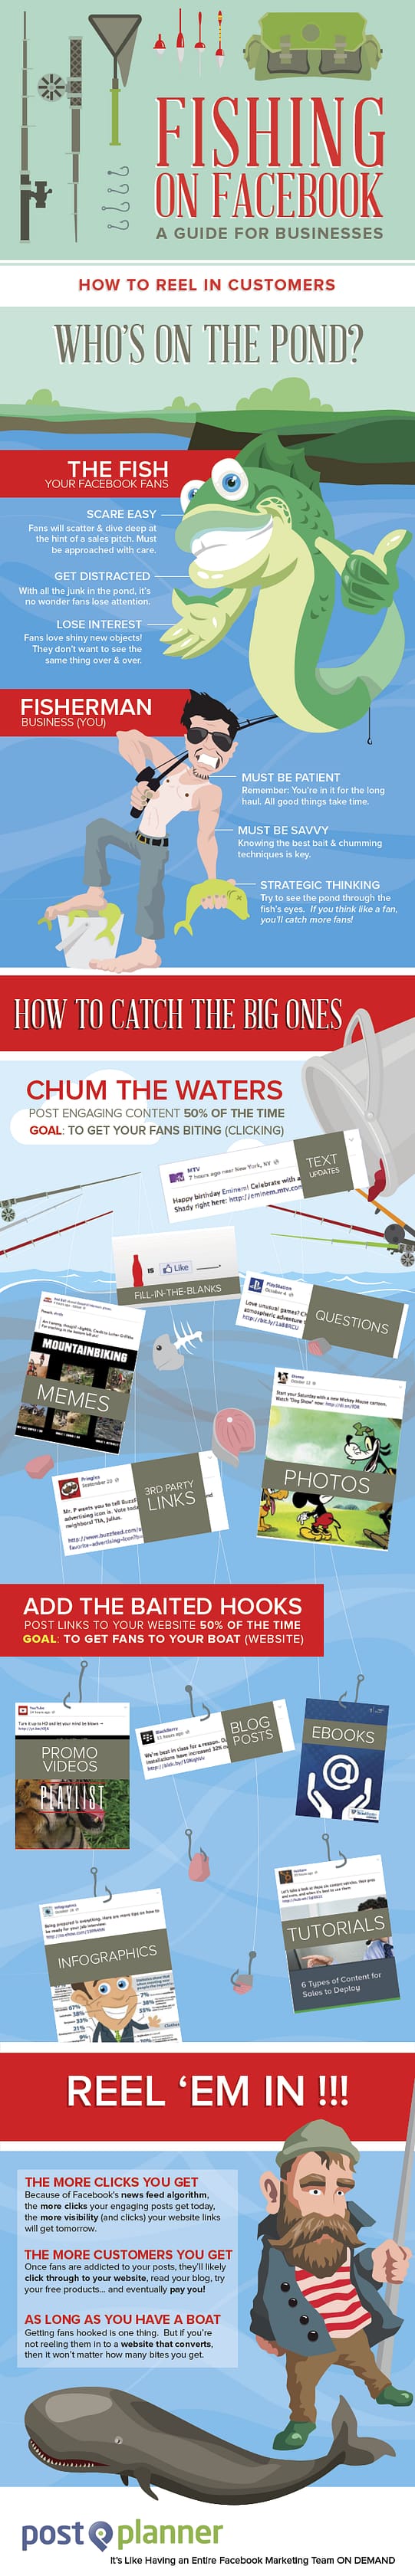 facebook-is-like-fishing-infographic